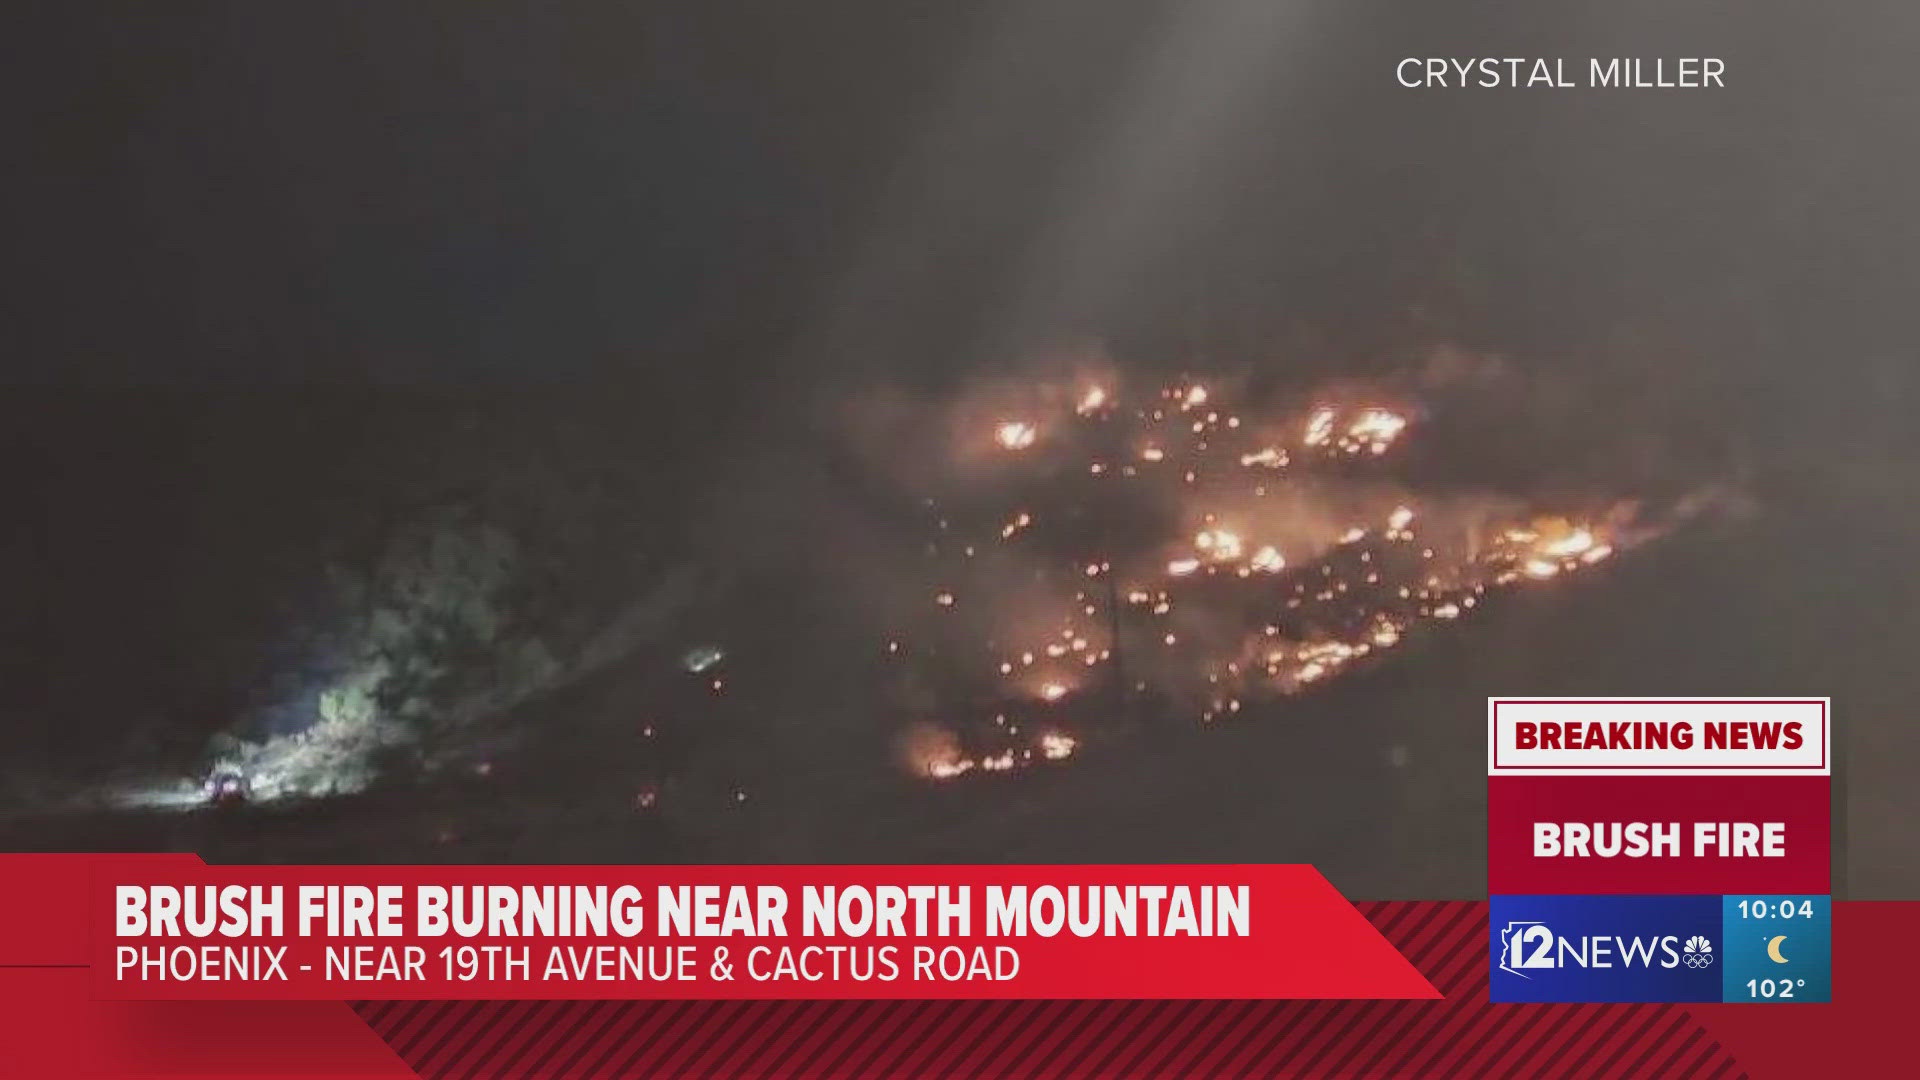 The brush fire started Thursday night near 19th Avenue and Cactus Road.